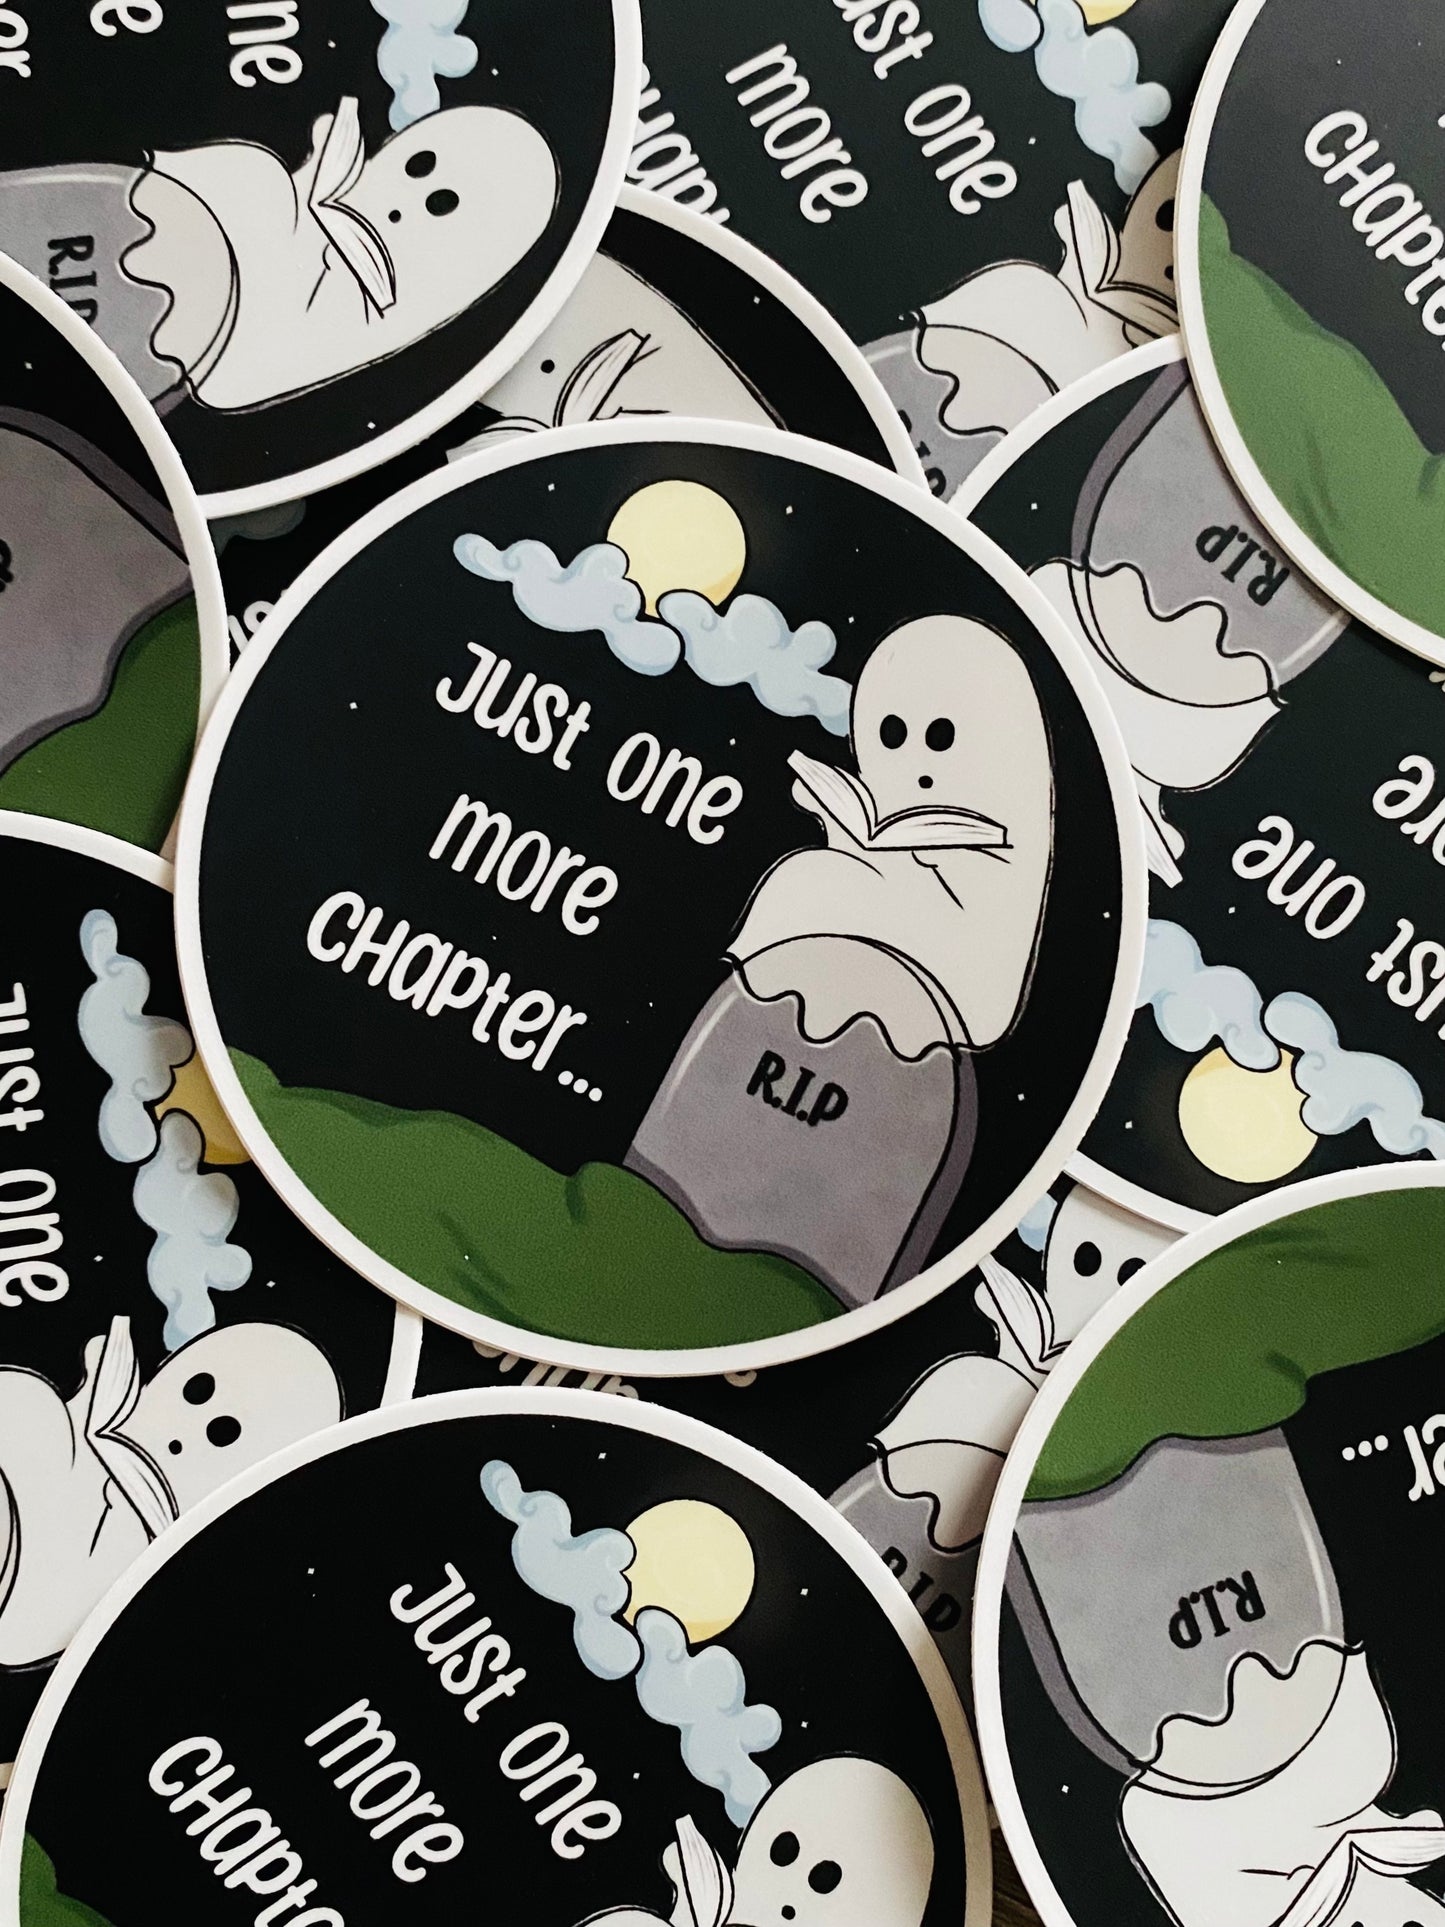 "One More Chapter" Sticker